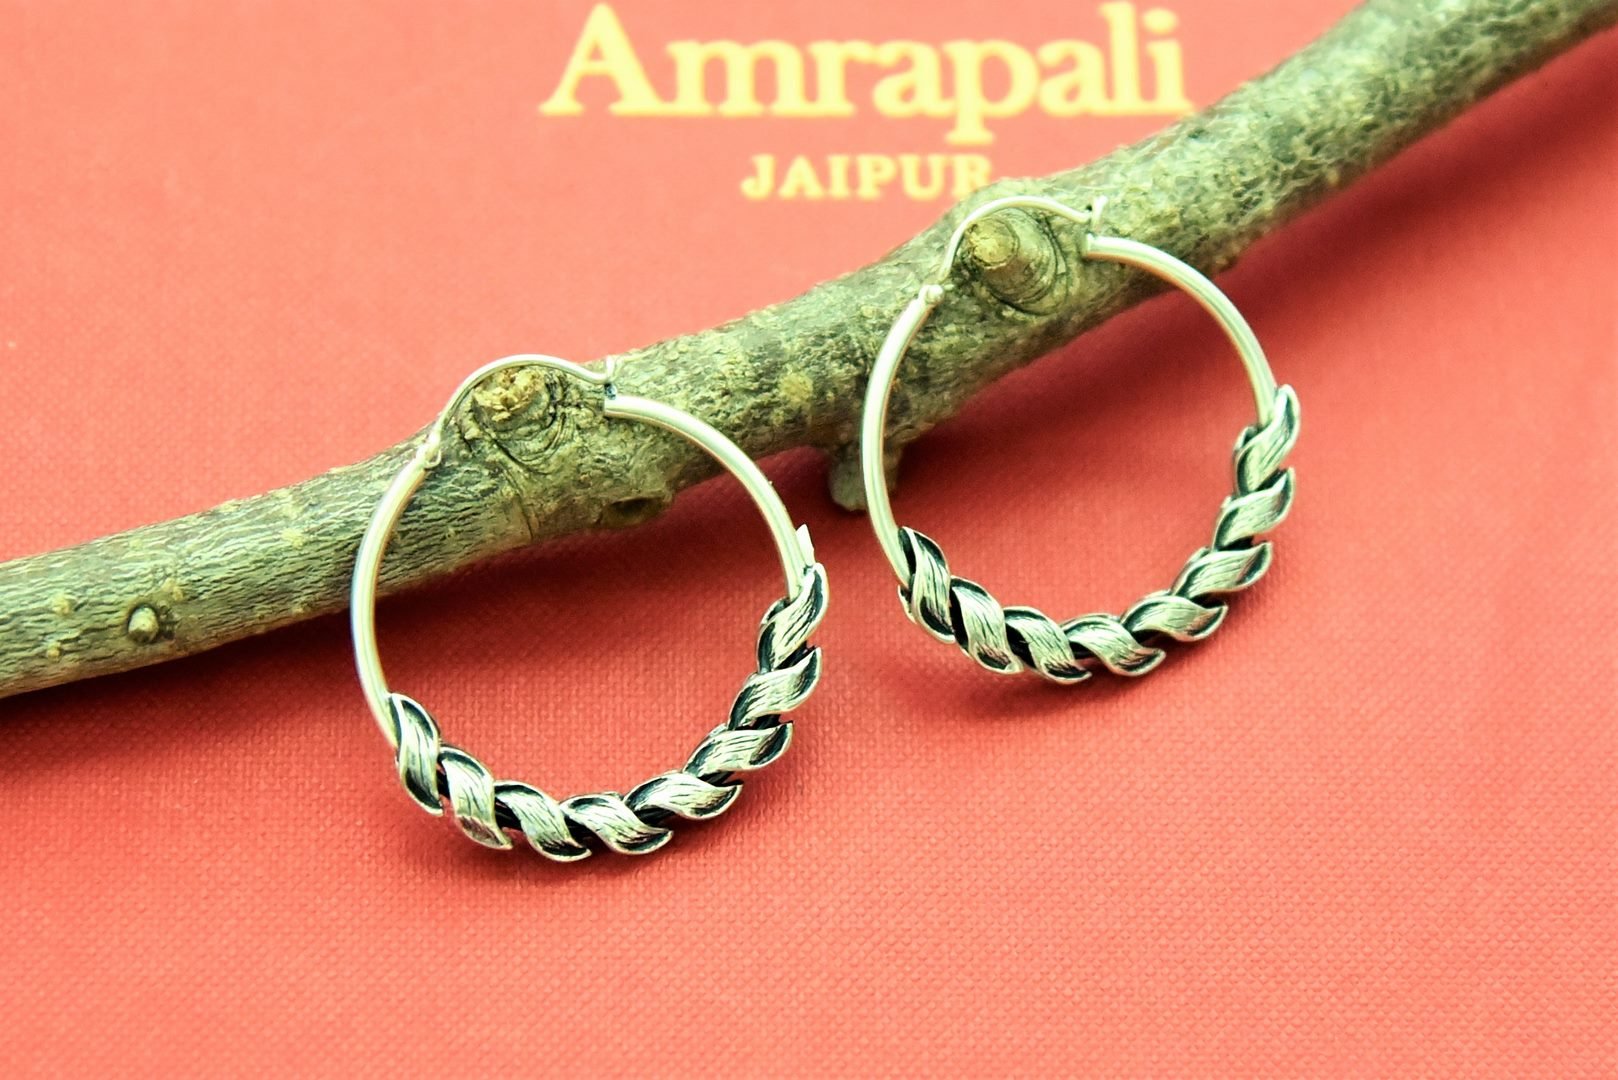 Buy Amrapali antique silver earrings online in USA. Look beautiful in Indian jewelry, gold plated jewelry , silver jewelry, gold plated earrings, wedding jewellery from Pure Elegance Indian fashion store in USA.-full view